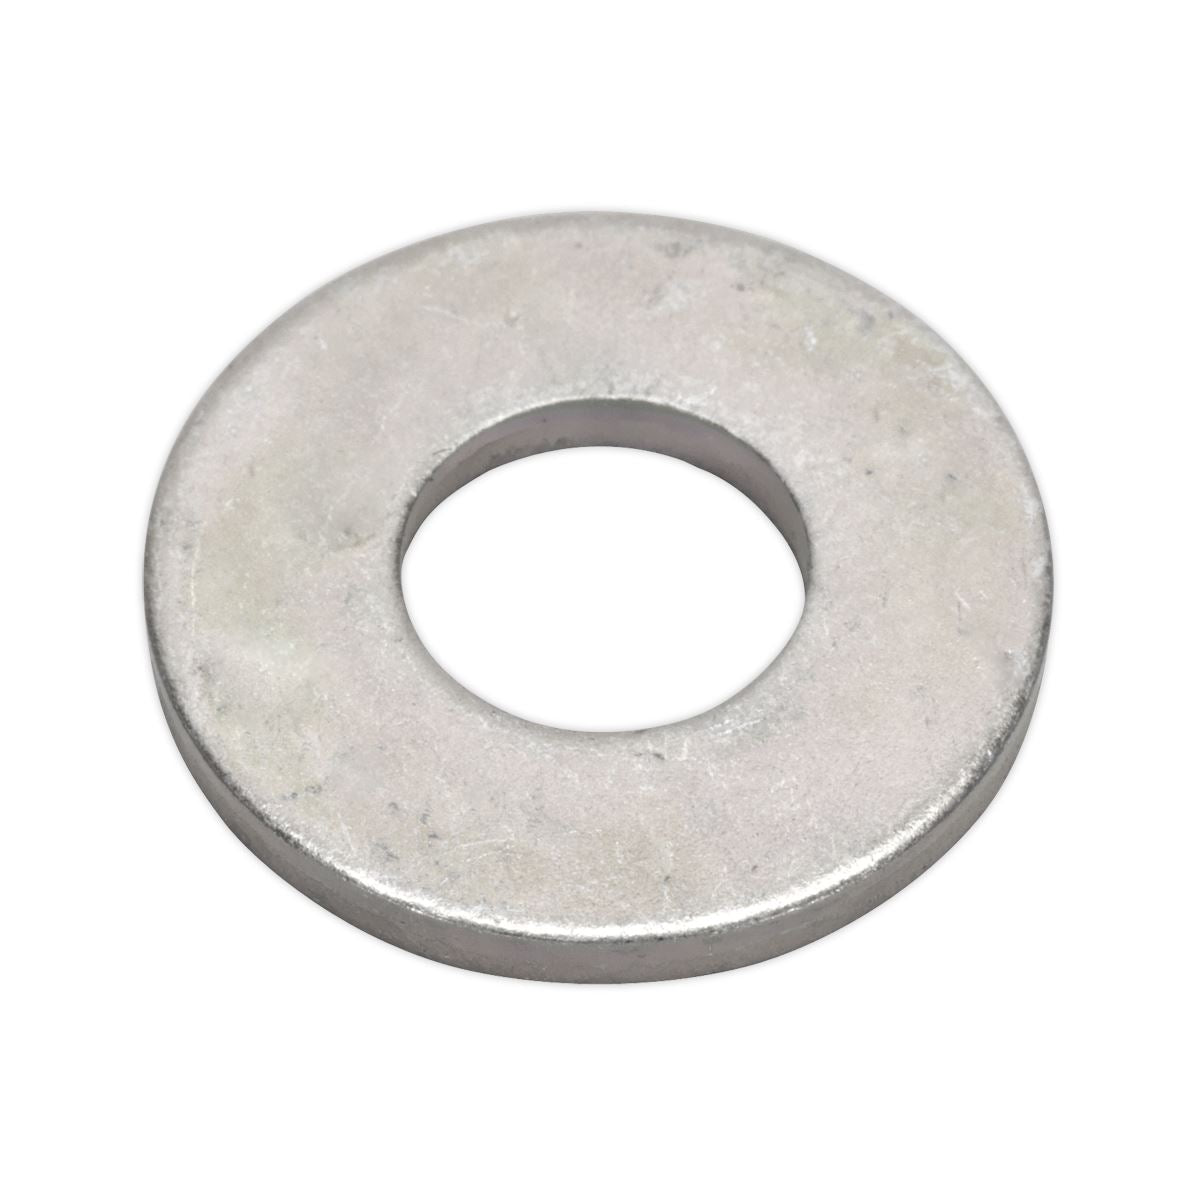 Sealey Flat Washer BS 4320 M10 x 24mm Form C Pack of 100